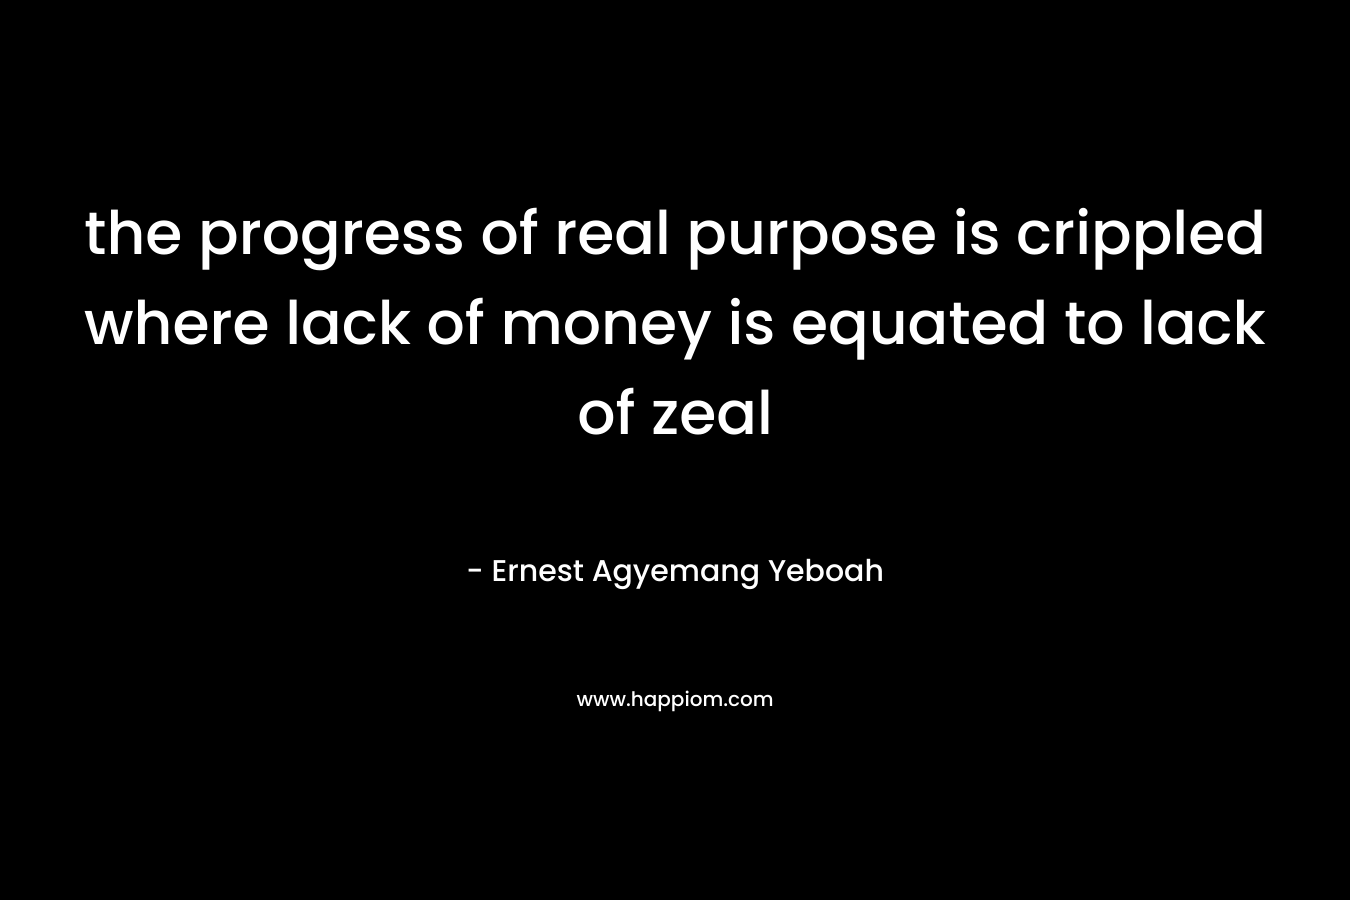 the progress of real purpose is crippled where lack of money is equated to lack of zeal – Ernest Agyemang Yeboah